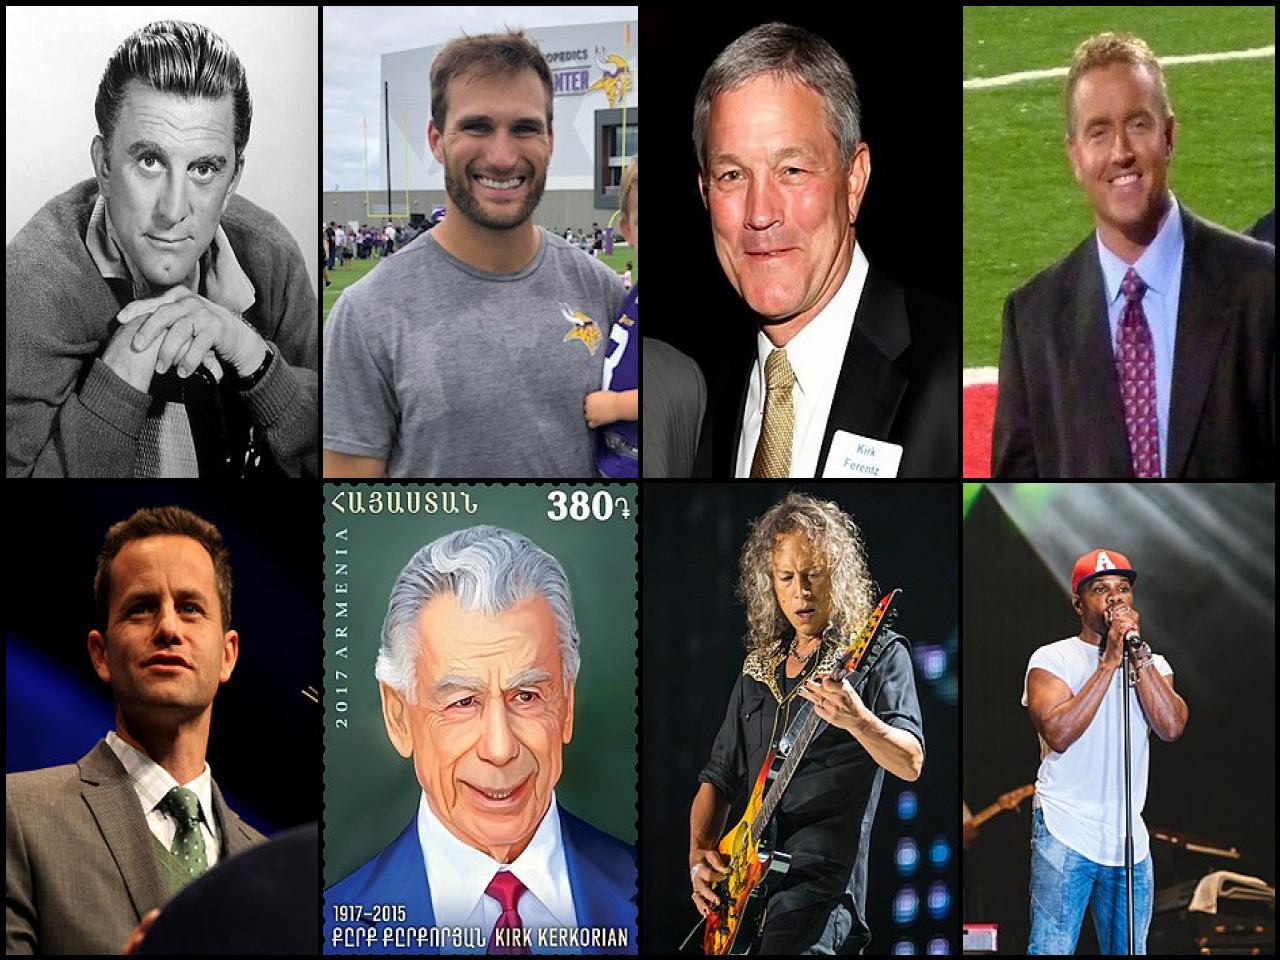 Famous People with name Kirk